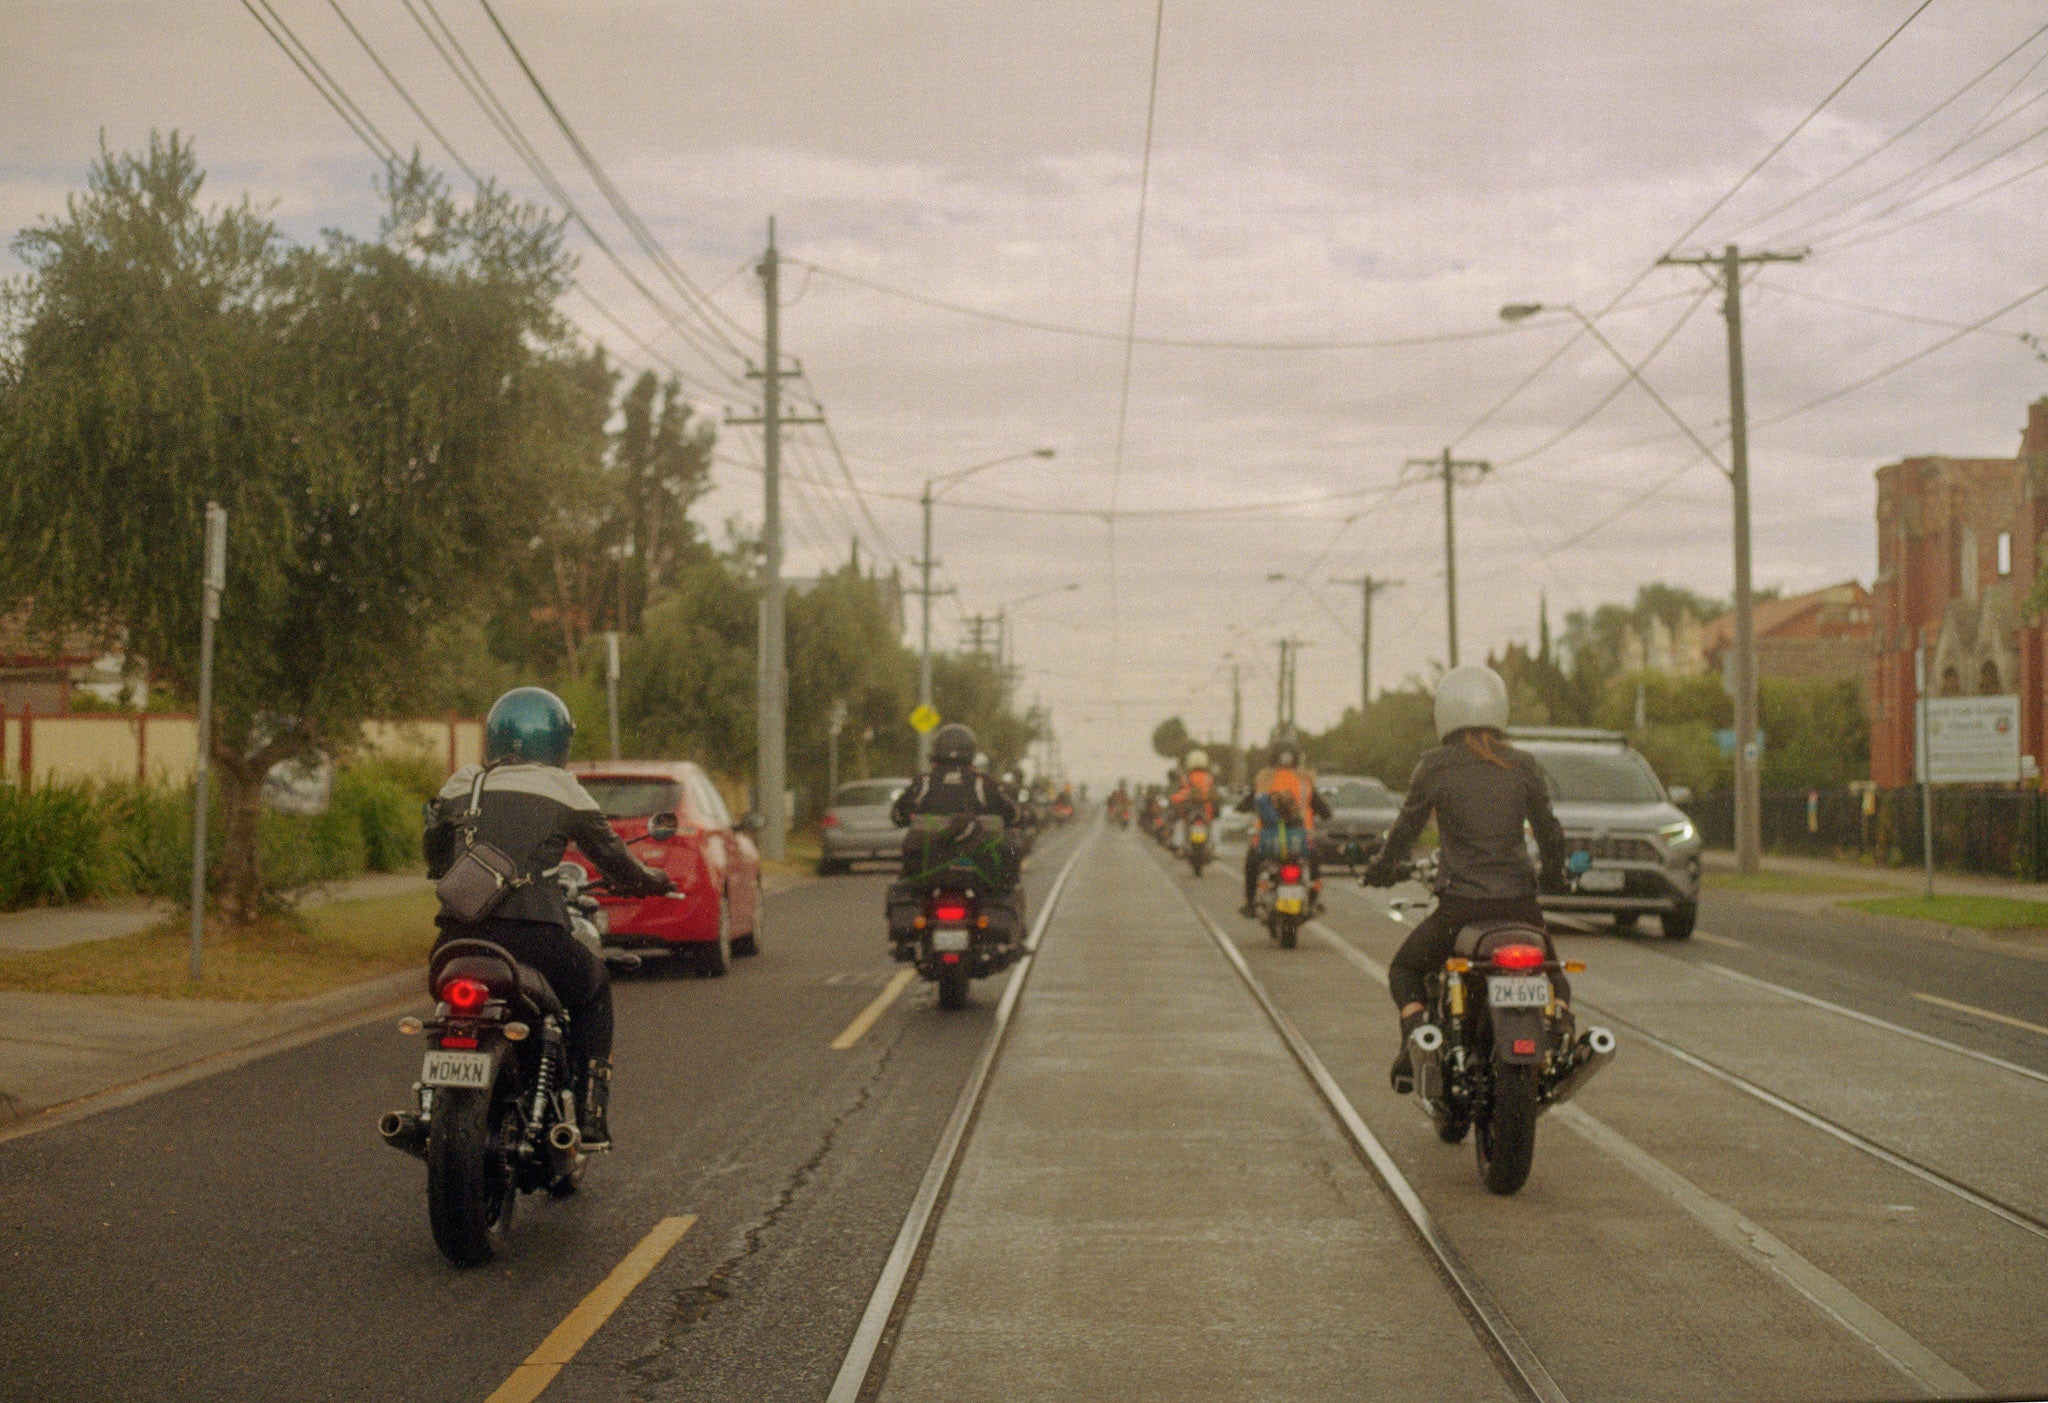 Motorcycle culture photography by Em Jensen